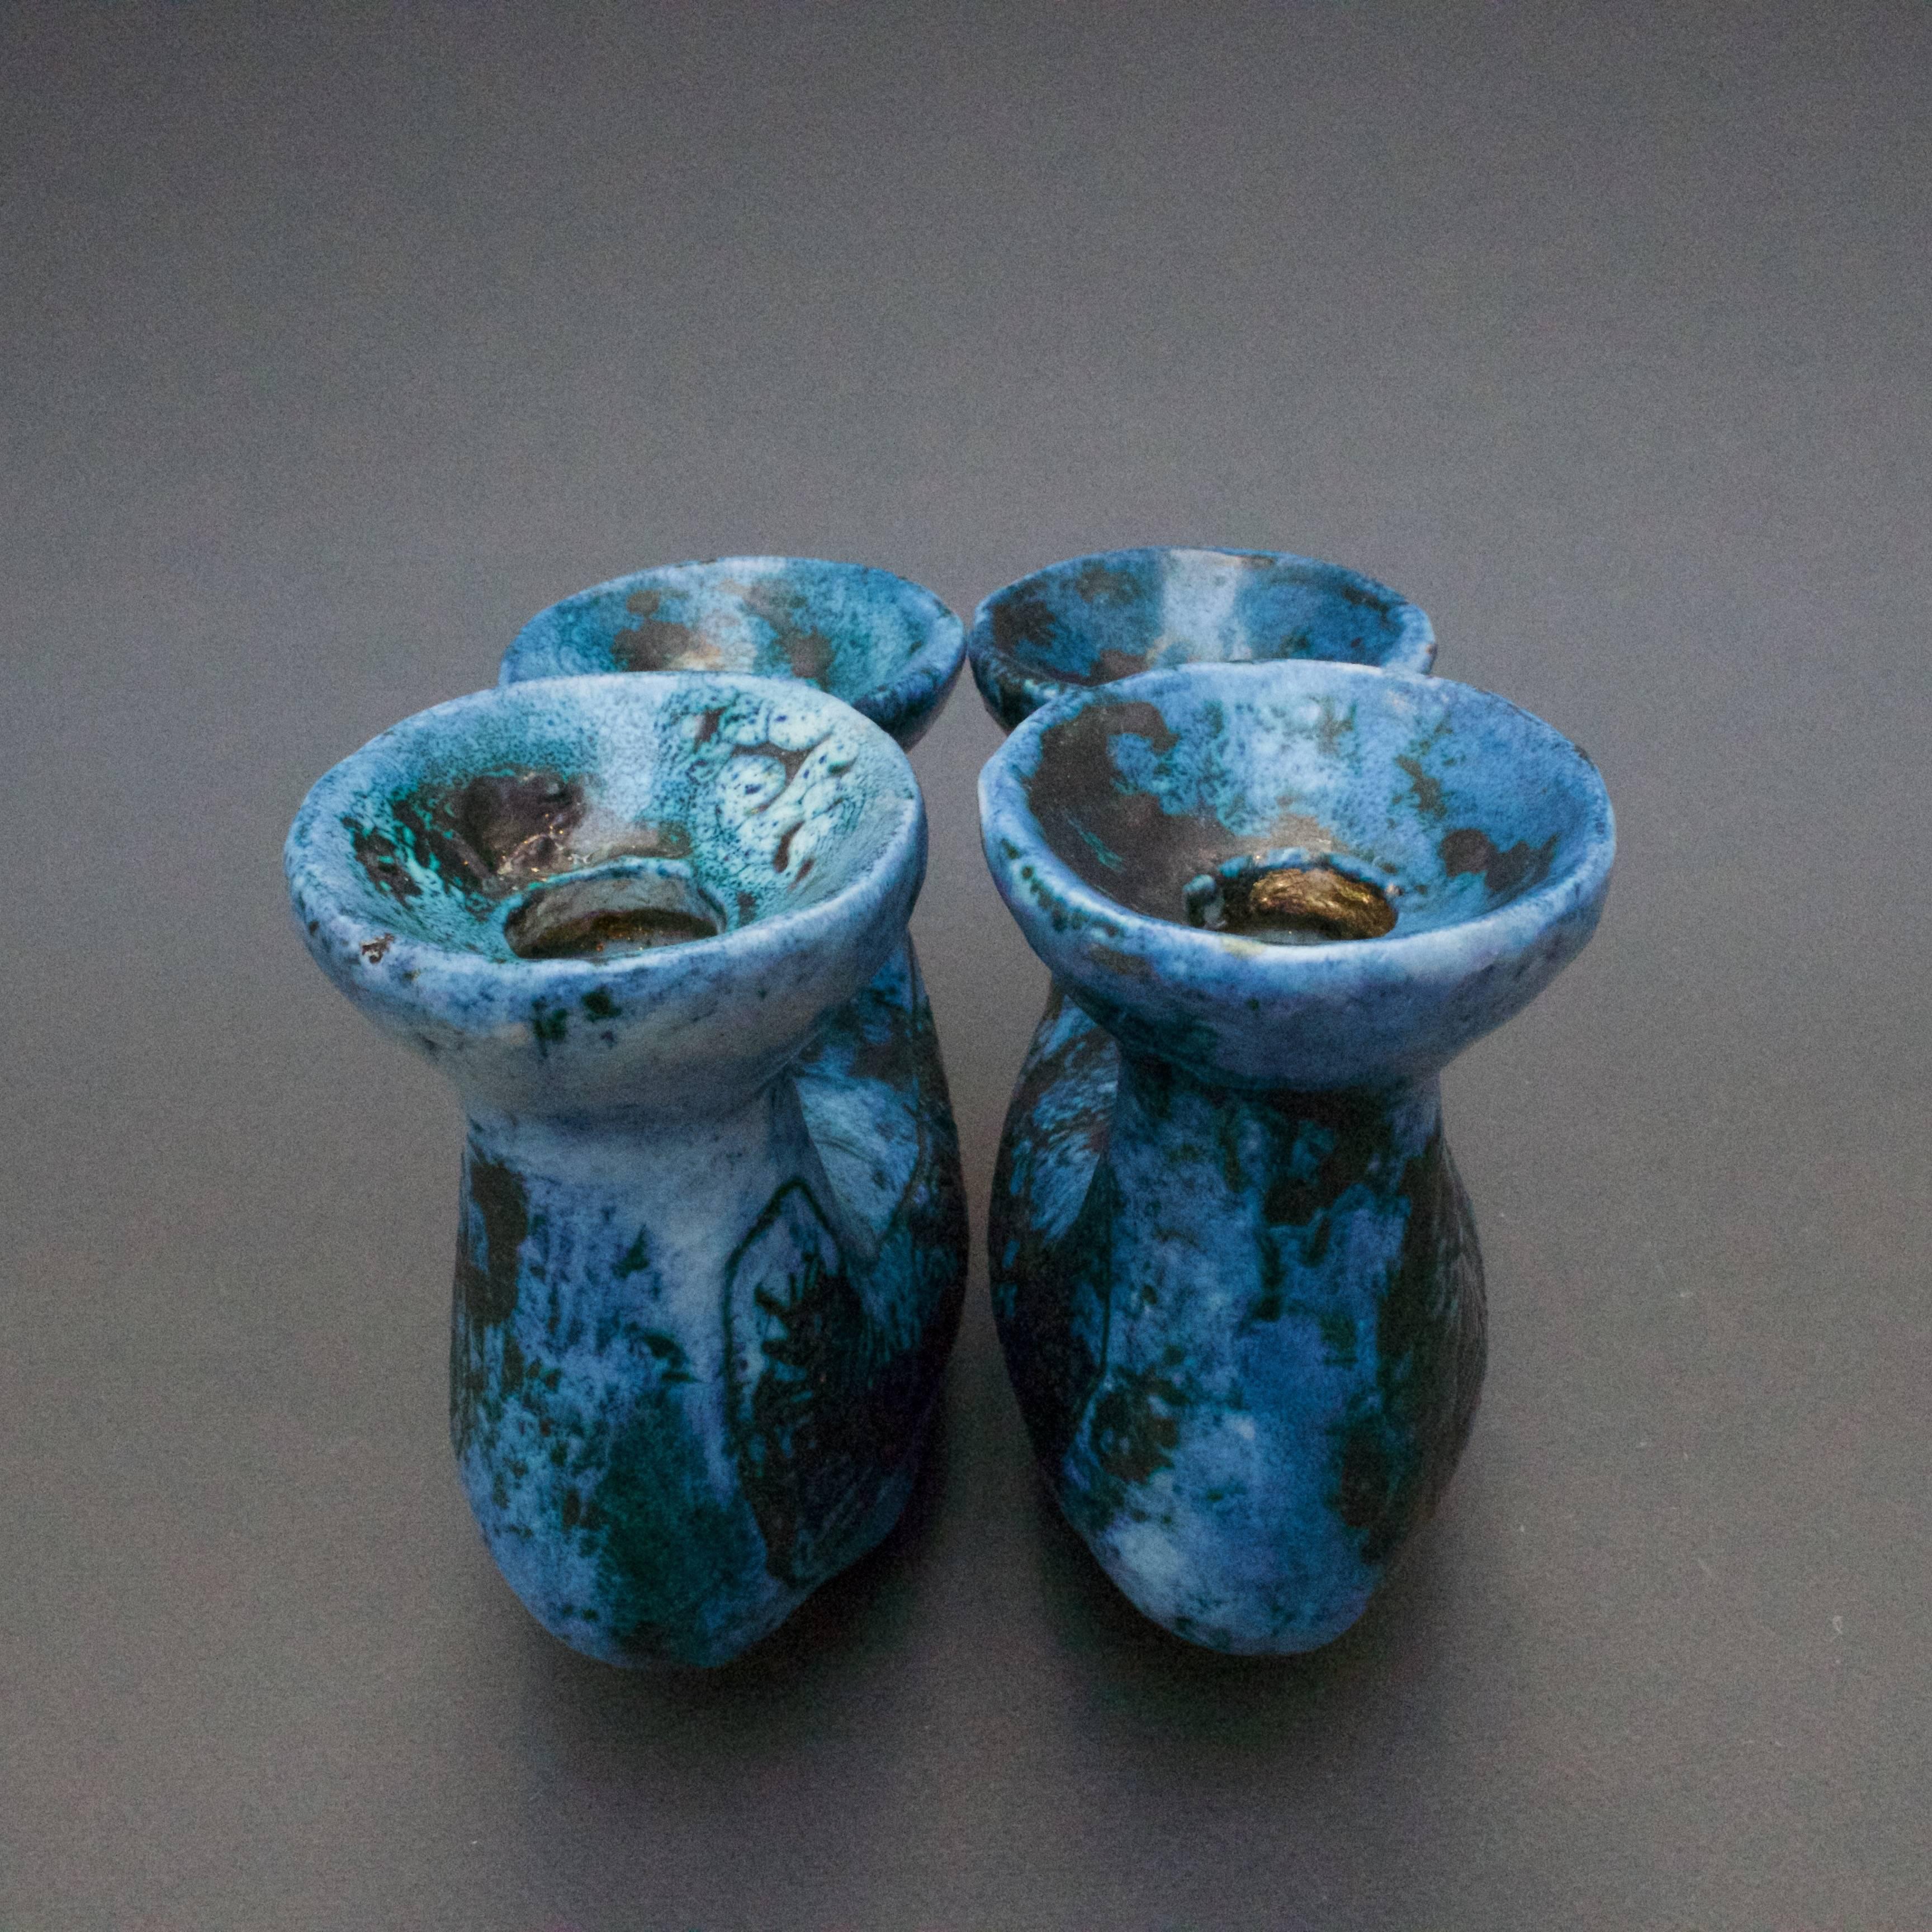 20th Century Pair of Ceramic Blue Candle Holders by Jacques Blin, Vallauris, circa 1950s